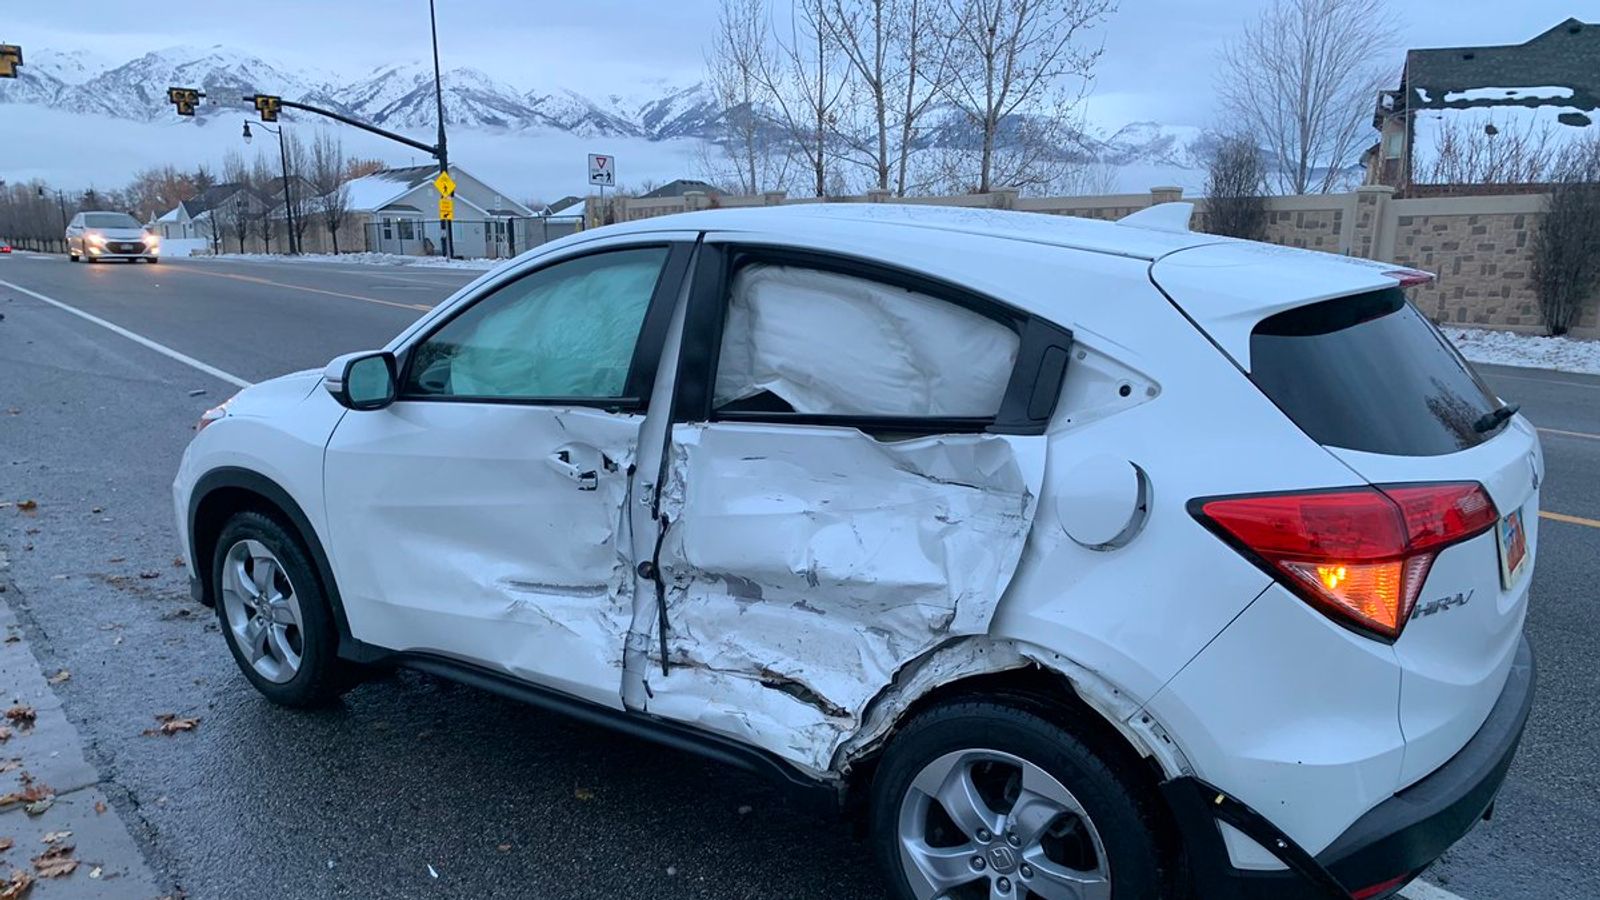 'Bird Box Challenge': Teen crashes after driving car blindfolded